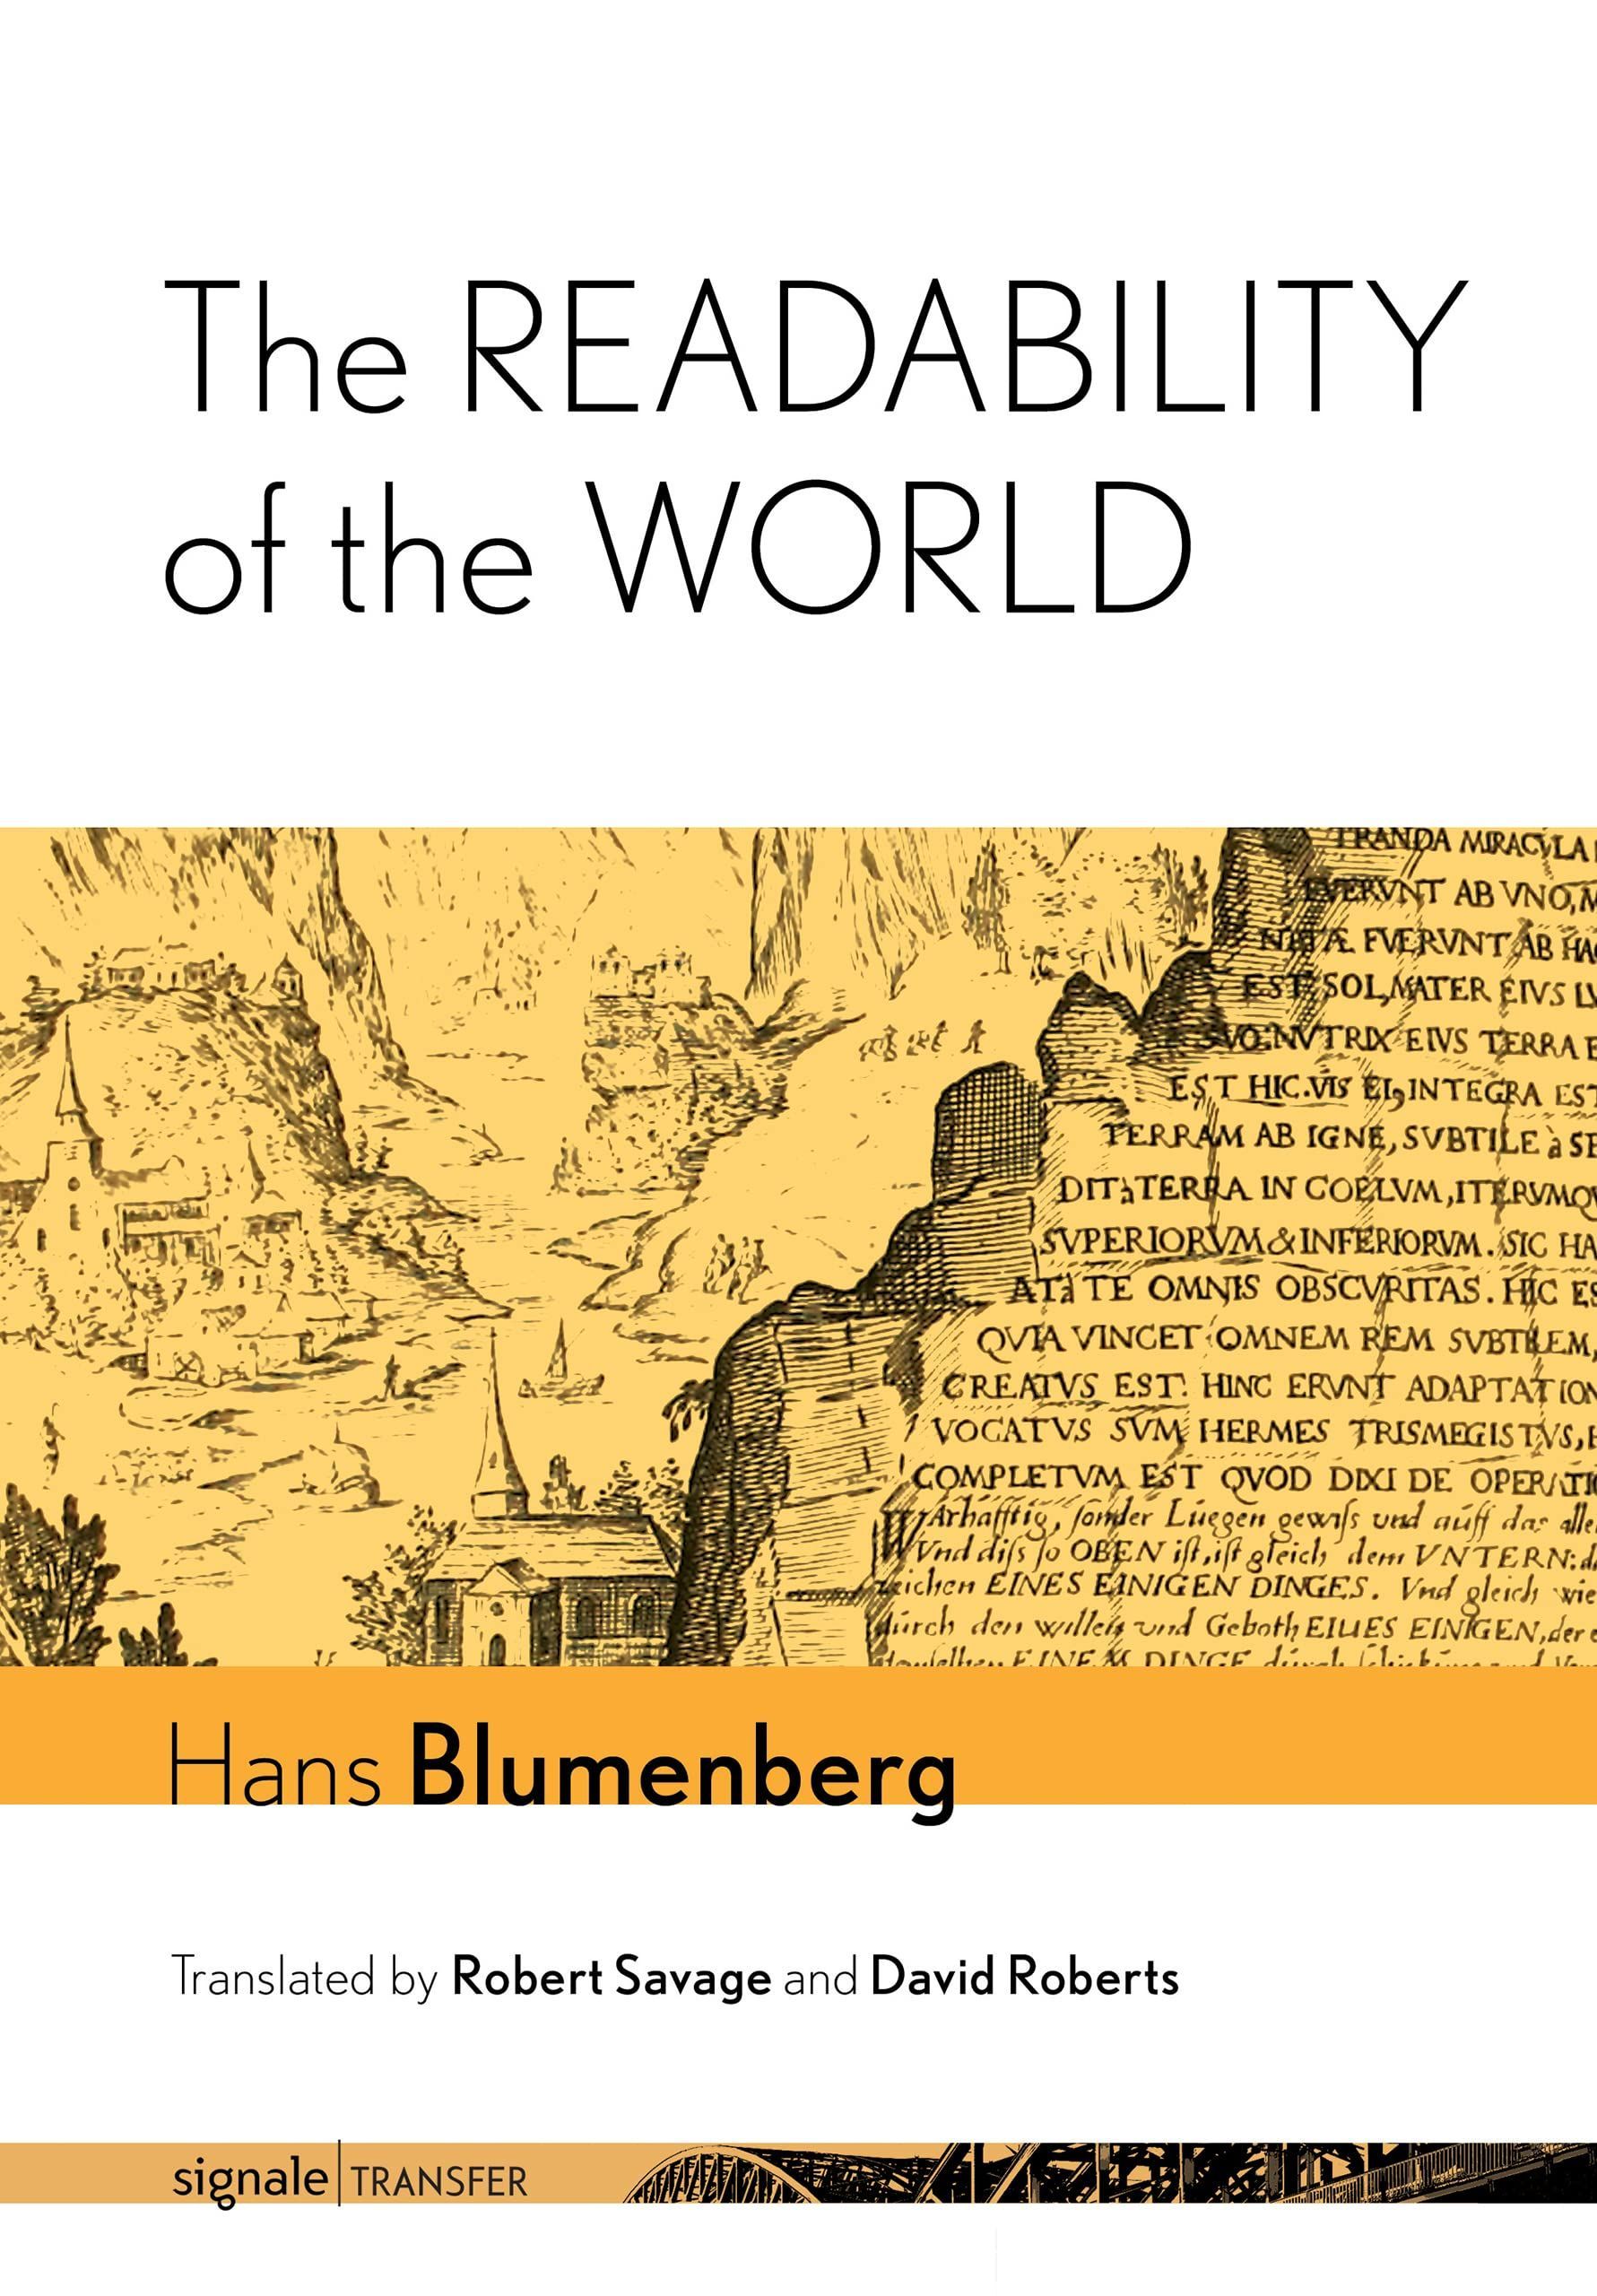 No Frigate Like a Metaphor: On Hans Blumenberg’s “The Readability of the World”